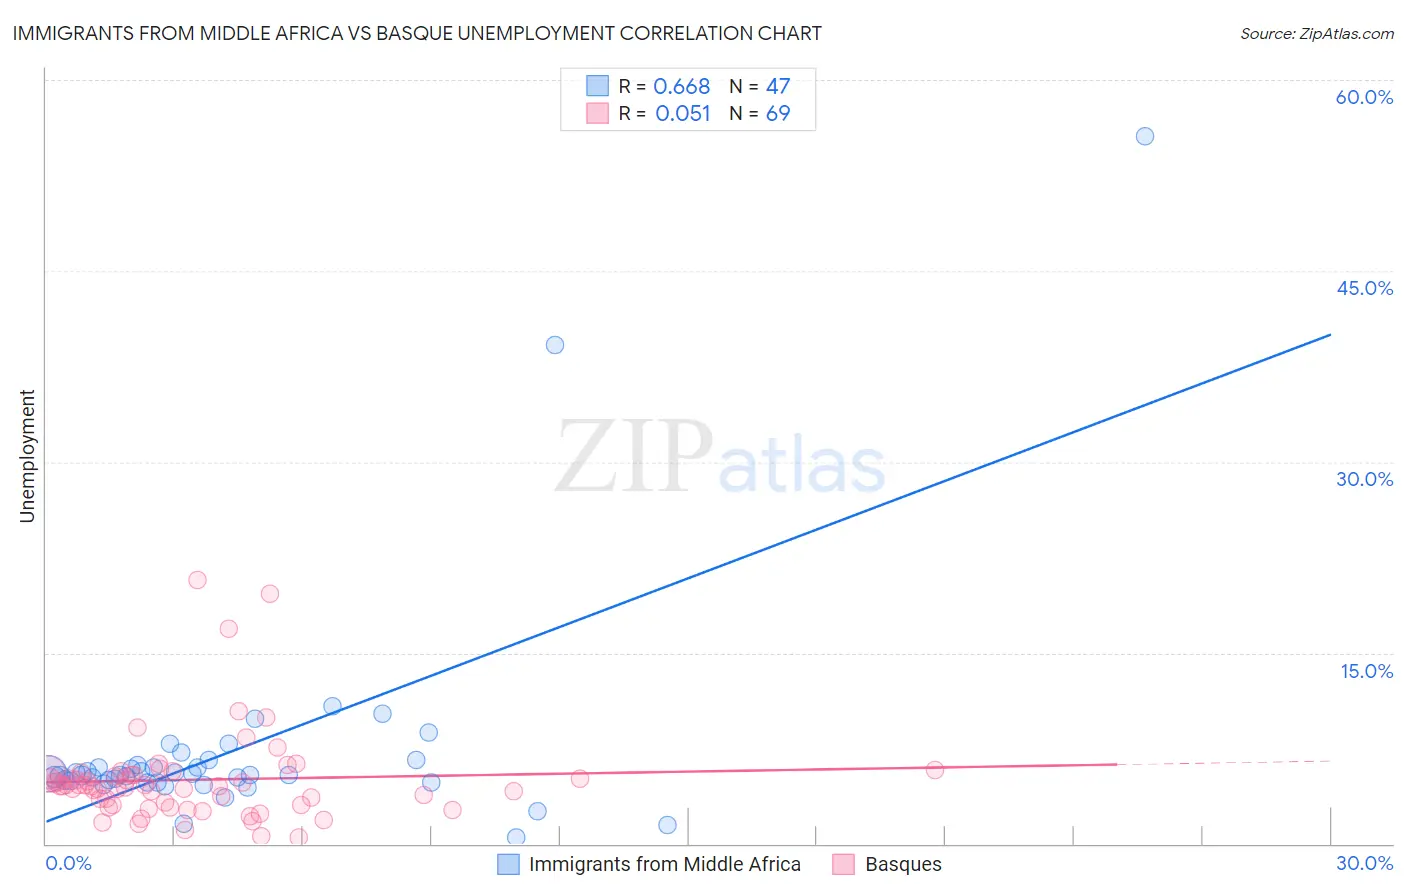 Immigrants from Middle Africa vs Basque Unemployment